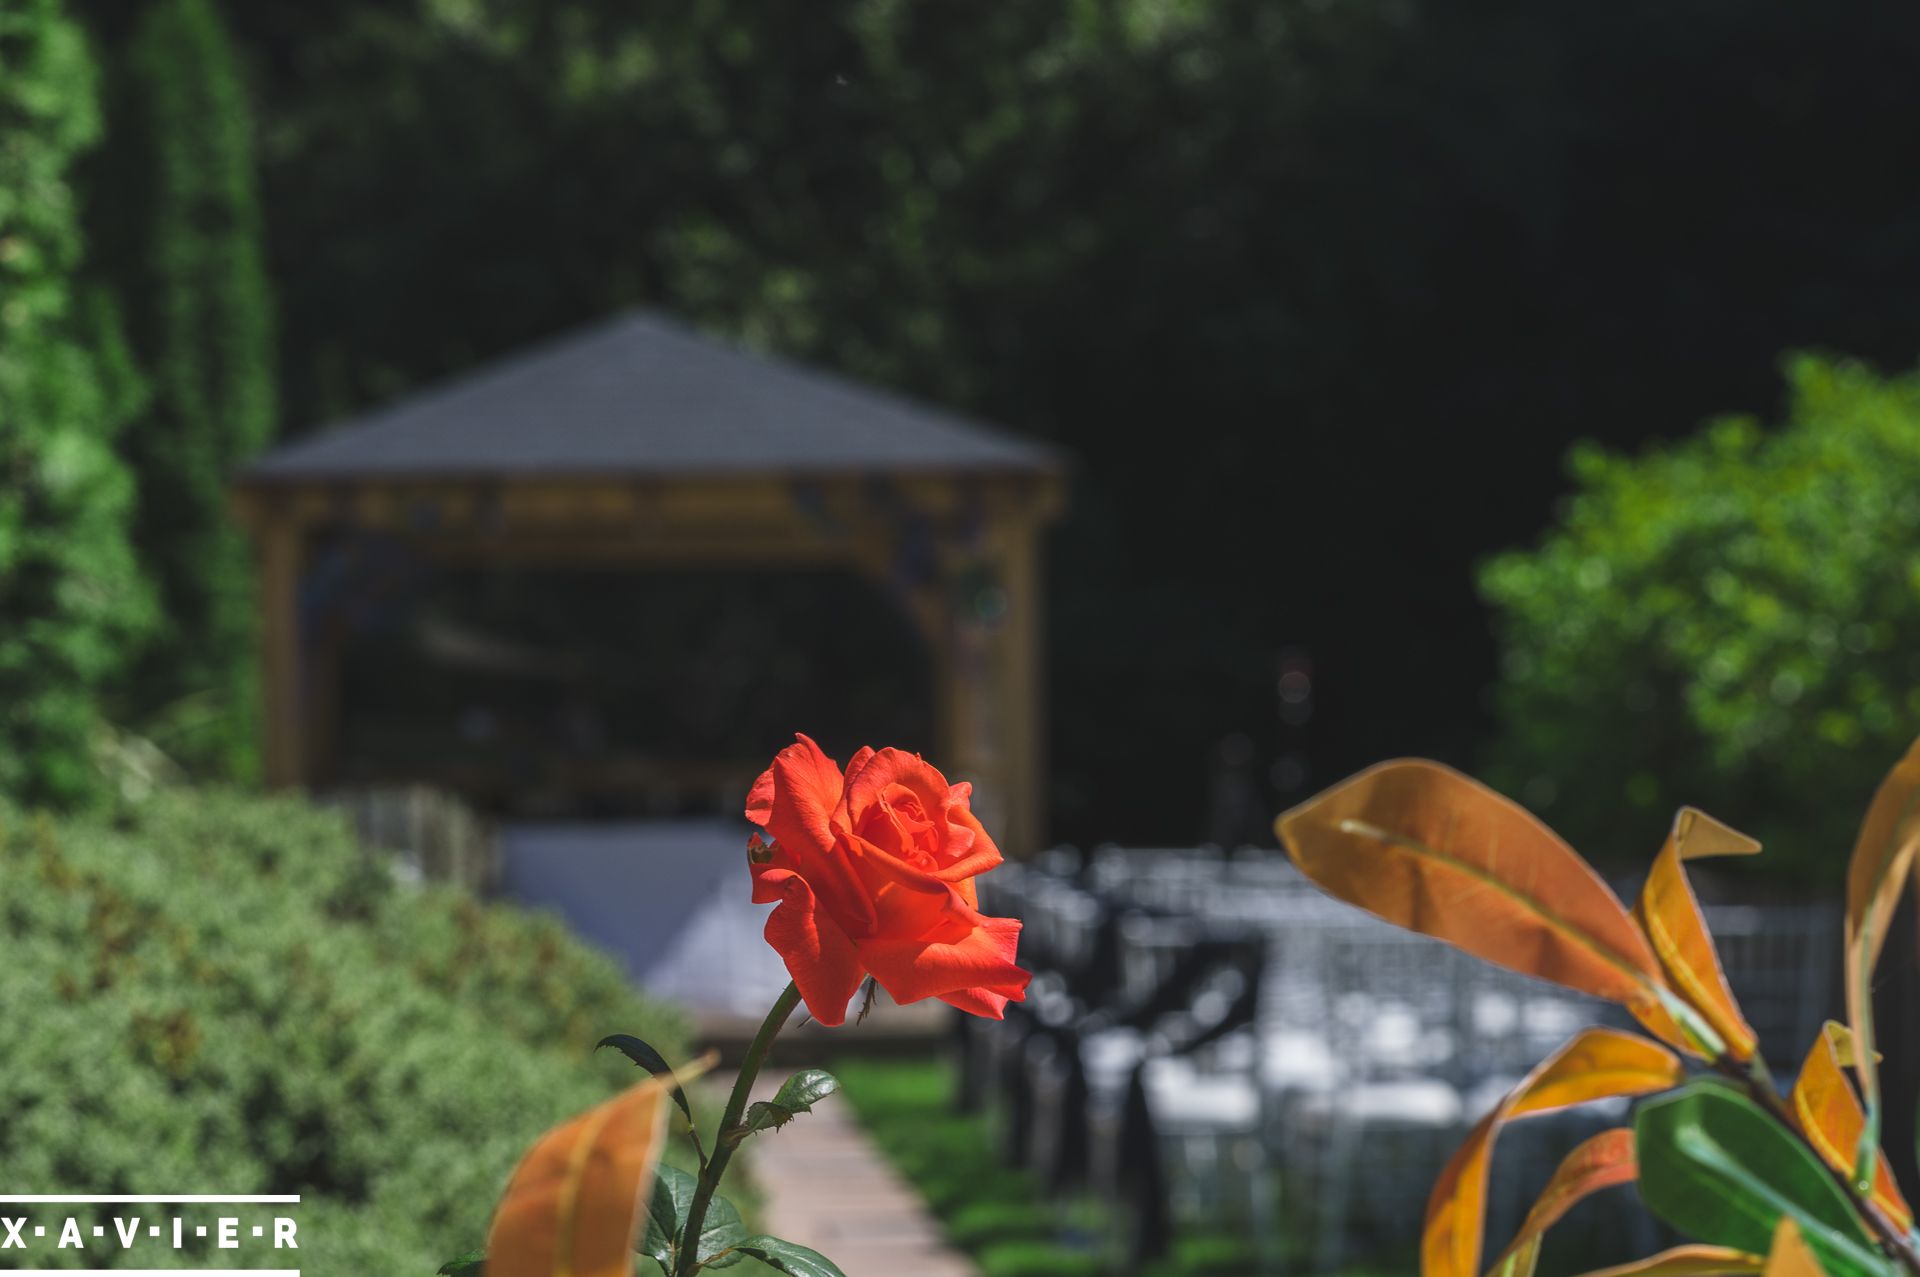 commemorative red rose by the outdoor ceremony chairs